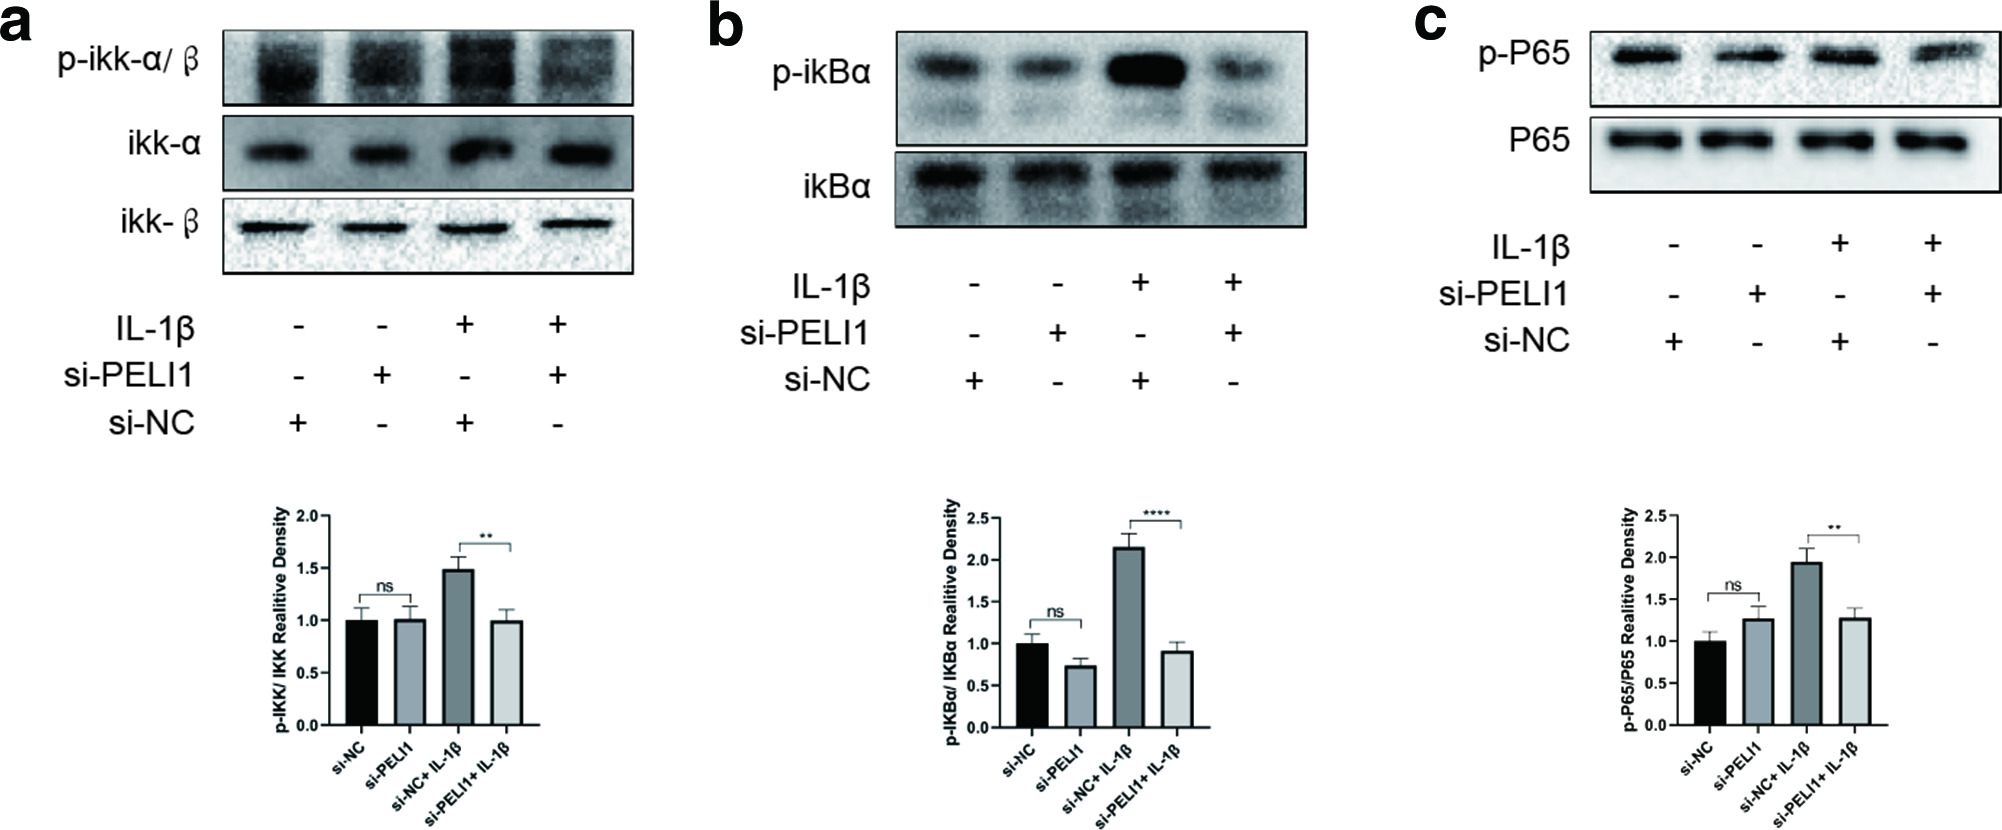 Fig. 3 
            Knockdown of Pellino1 (Peli1) inhibits nuclear factor kappa B (NF-κB) signalling in chondrocytes. a) Western blot showing that Peli1 knockout affected NF-κB signaling-related protein p-IKK/IKK. b) Western blot showing that Peli1 knockout affected NF-κB signaling-related protein p-IKBα/IKBα. c) Western blot showed that Peli1 knockout affected NF-κB signaling-related protein p-P65/P65. **p < 0.01, ****p < 0.0001 compared with si-NC transfected or si-NC+ IL-1β-treated chondrocytes.
          